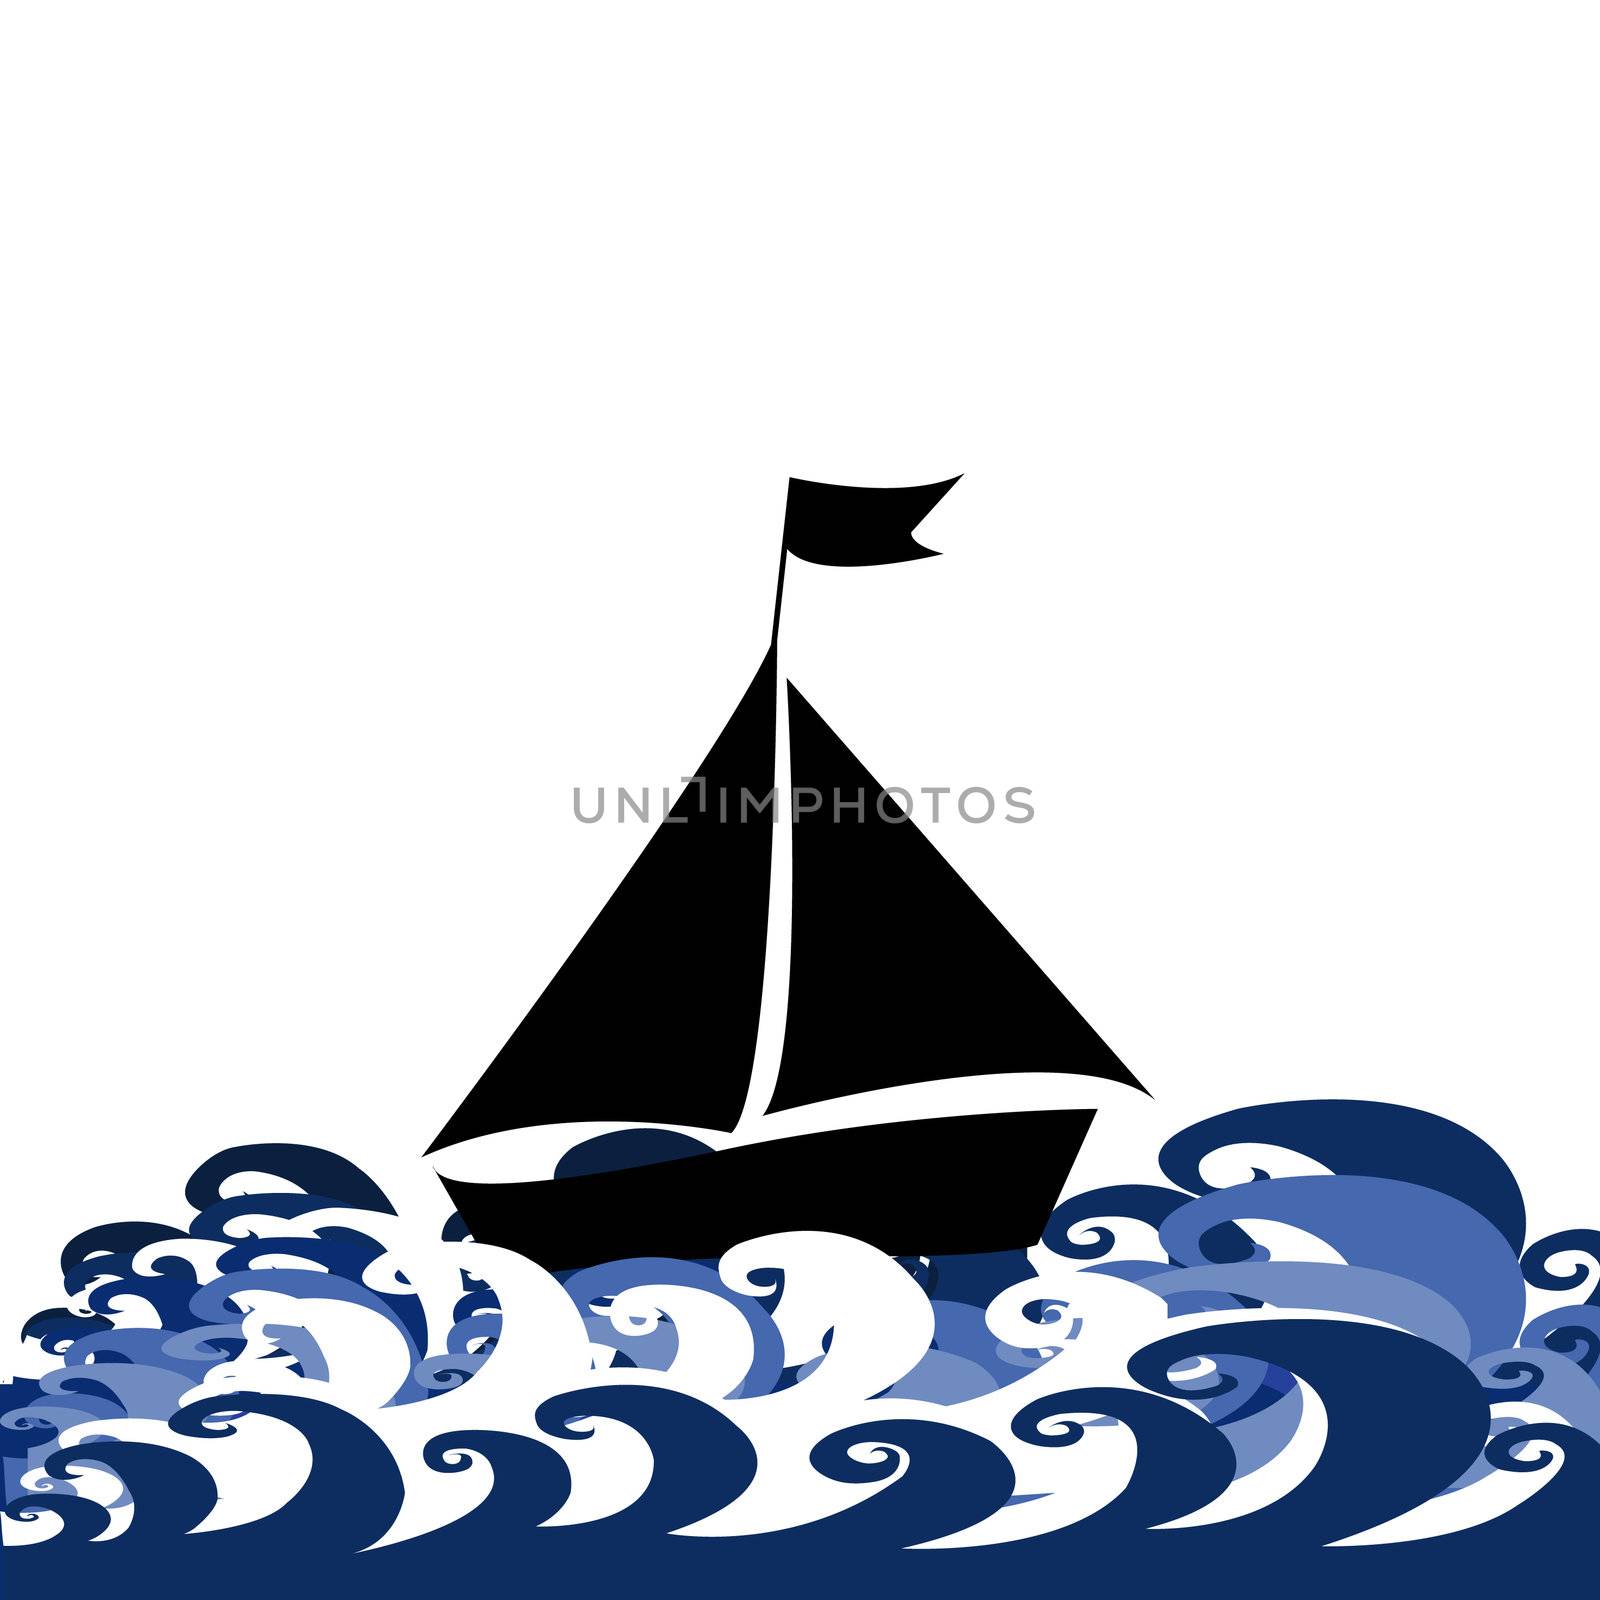 Illustration with sylized ship and waves by hibrida13